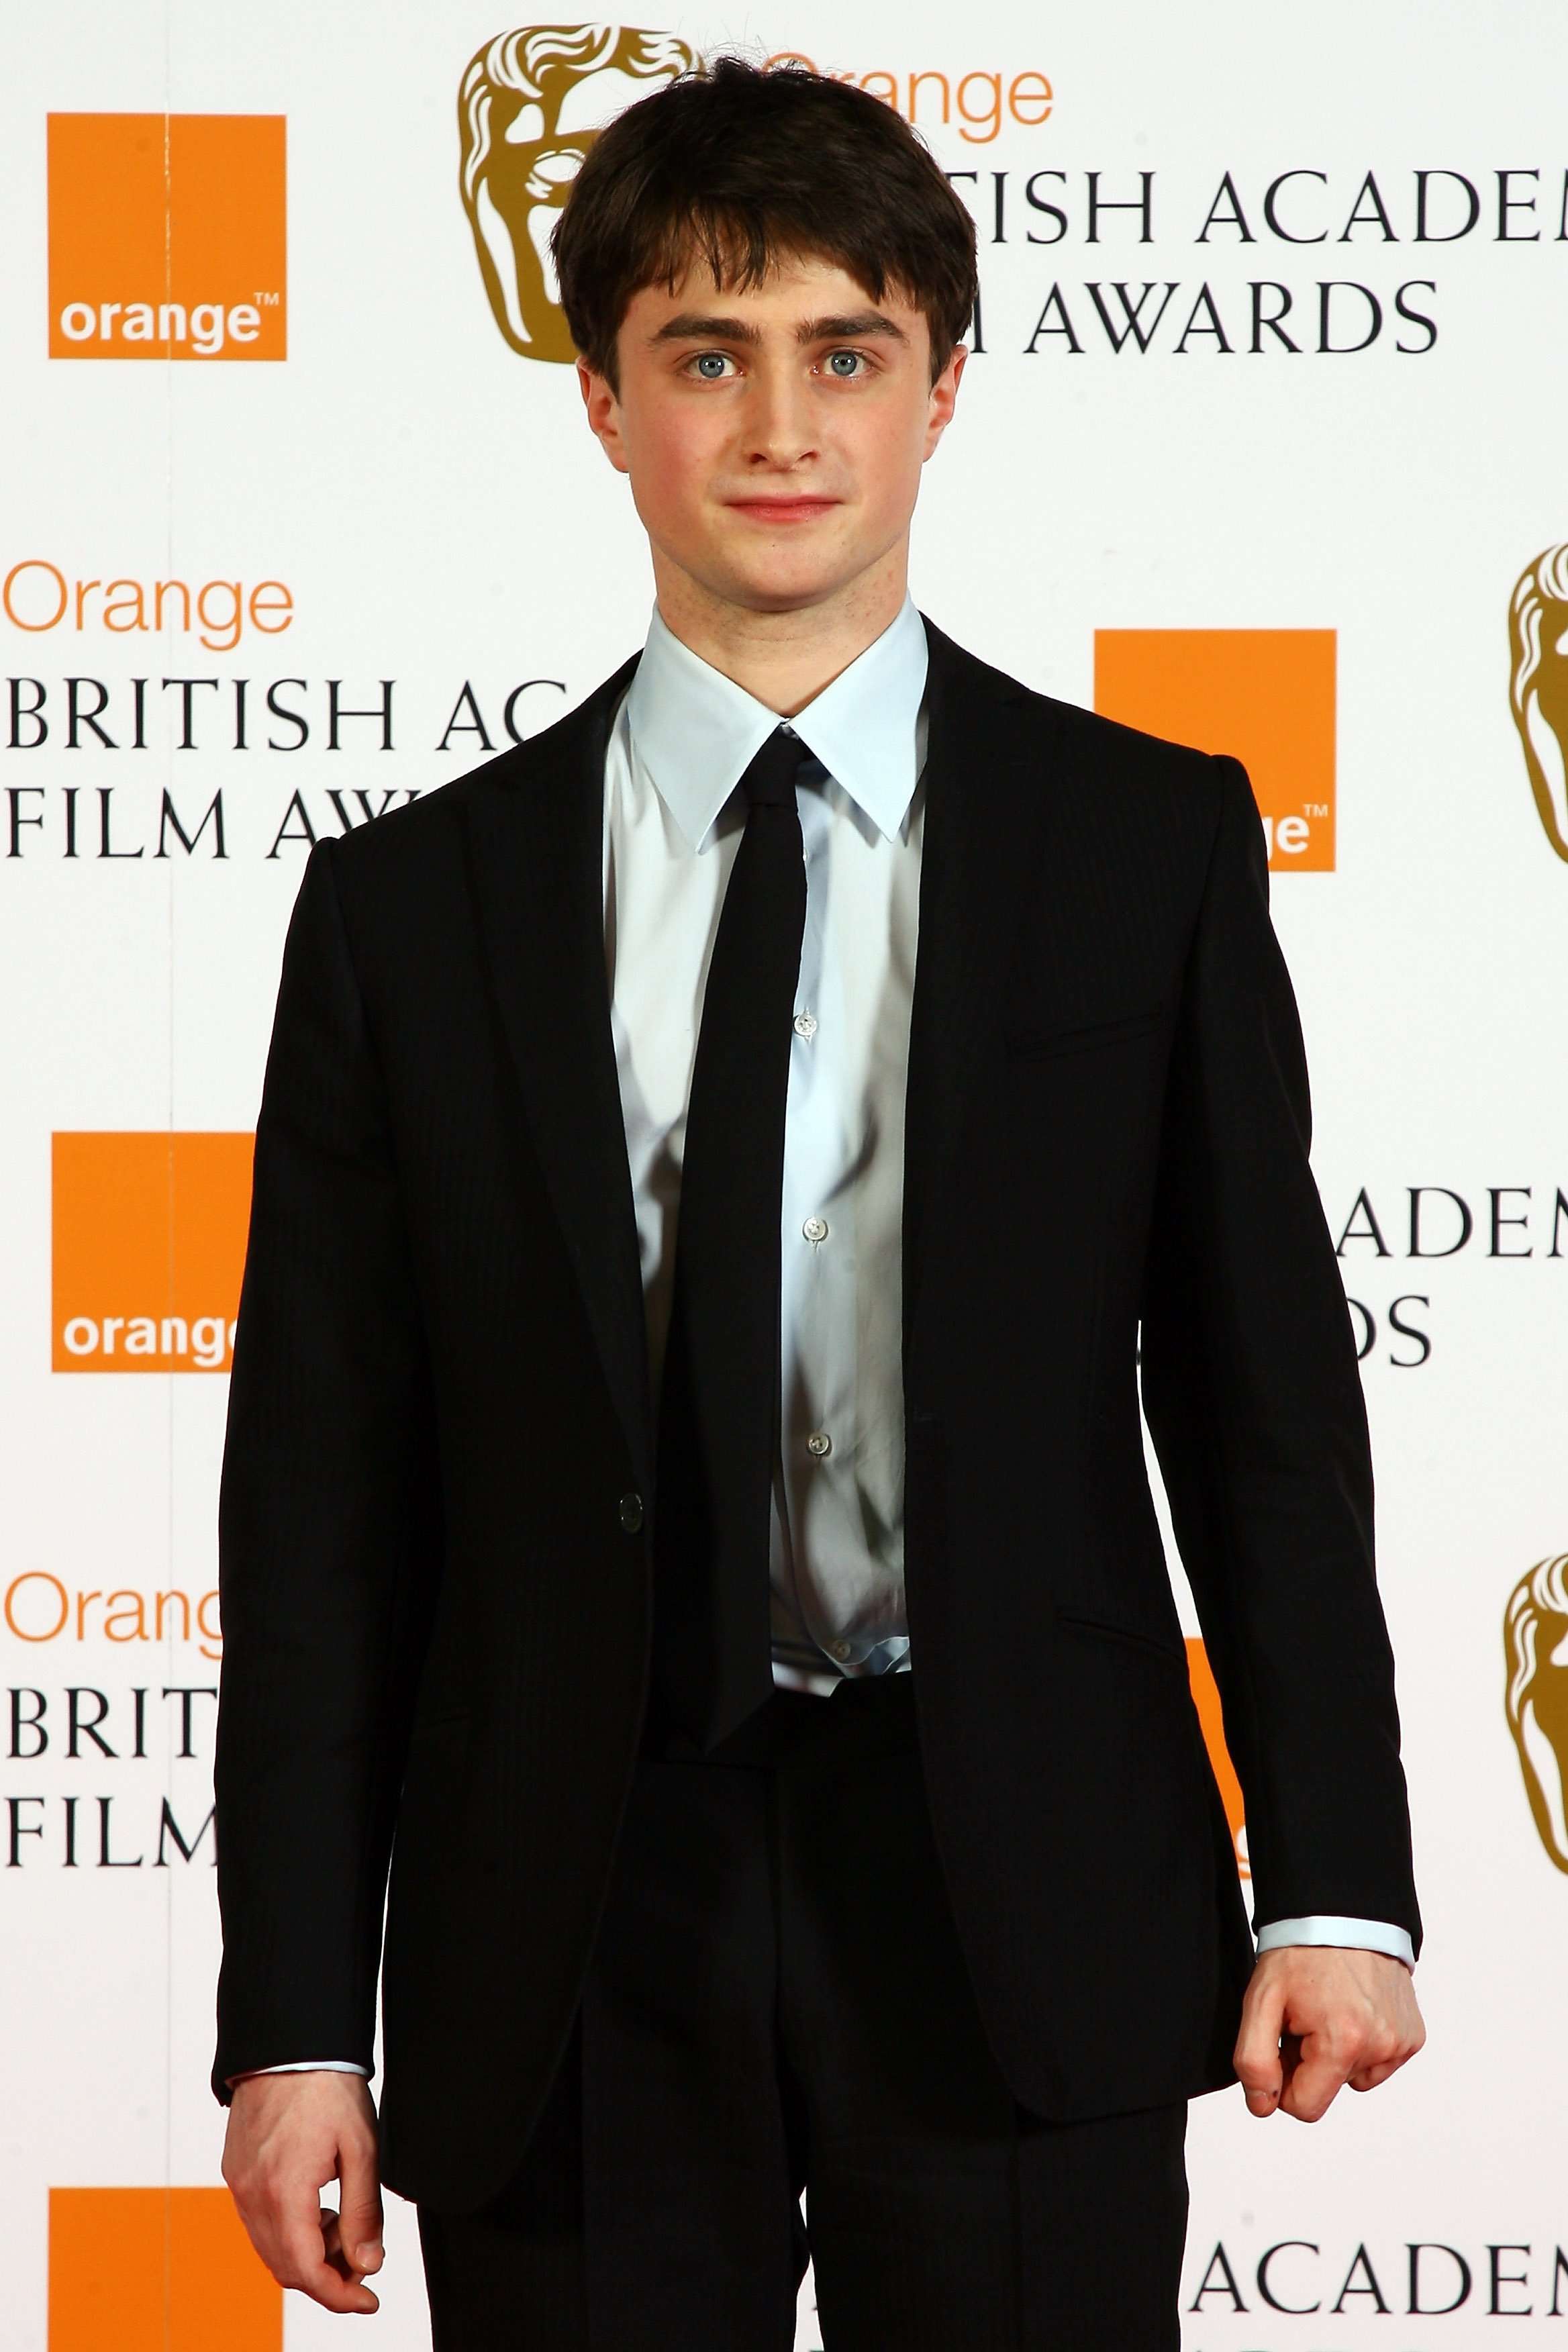 Daniel Radcliffe at the Orange British Academy Film Awards on February 10, 2008, in London, England. | Source: Getty Images